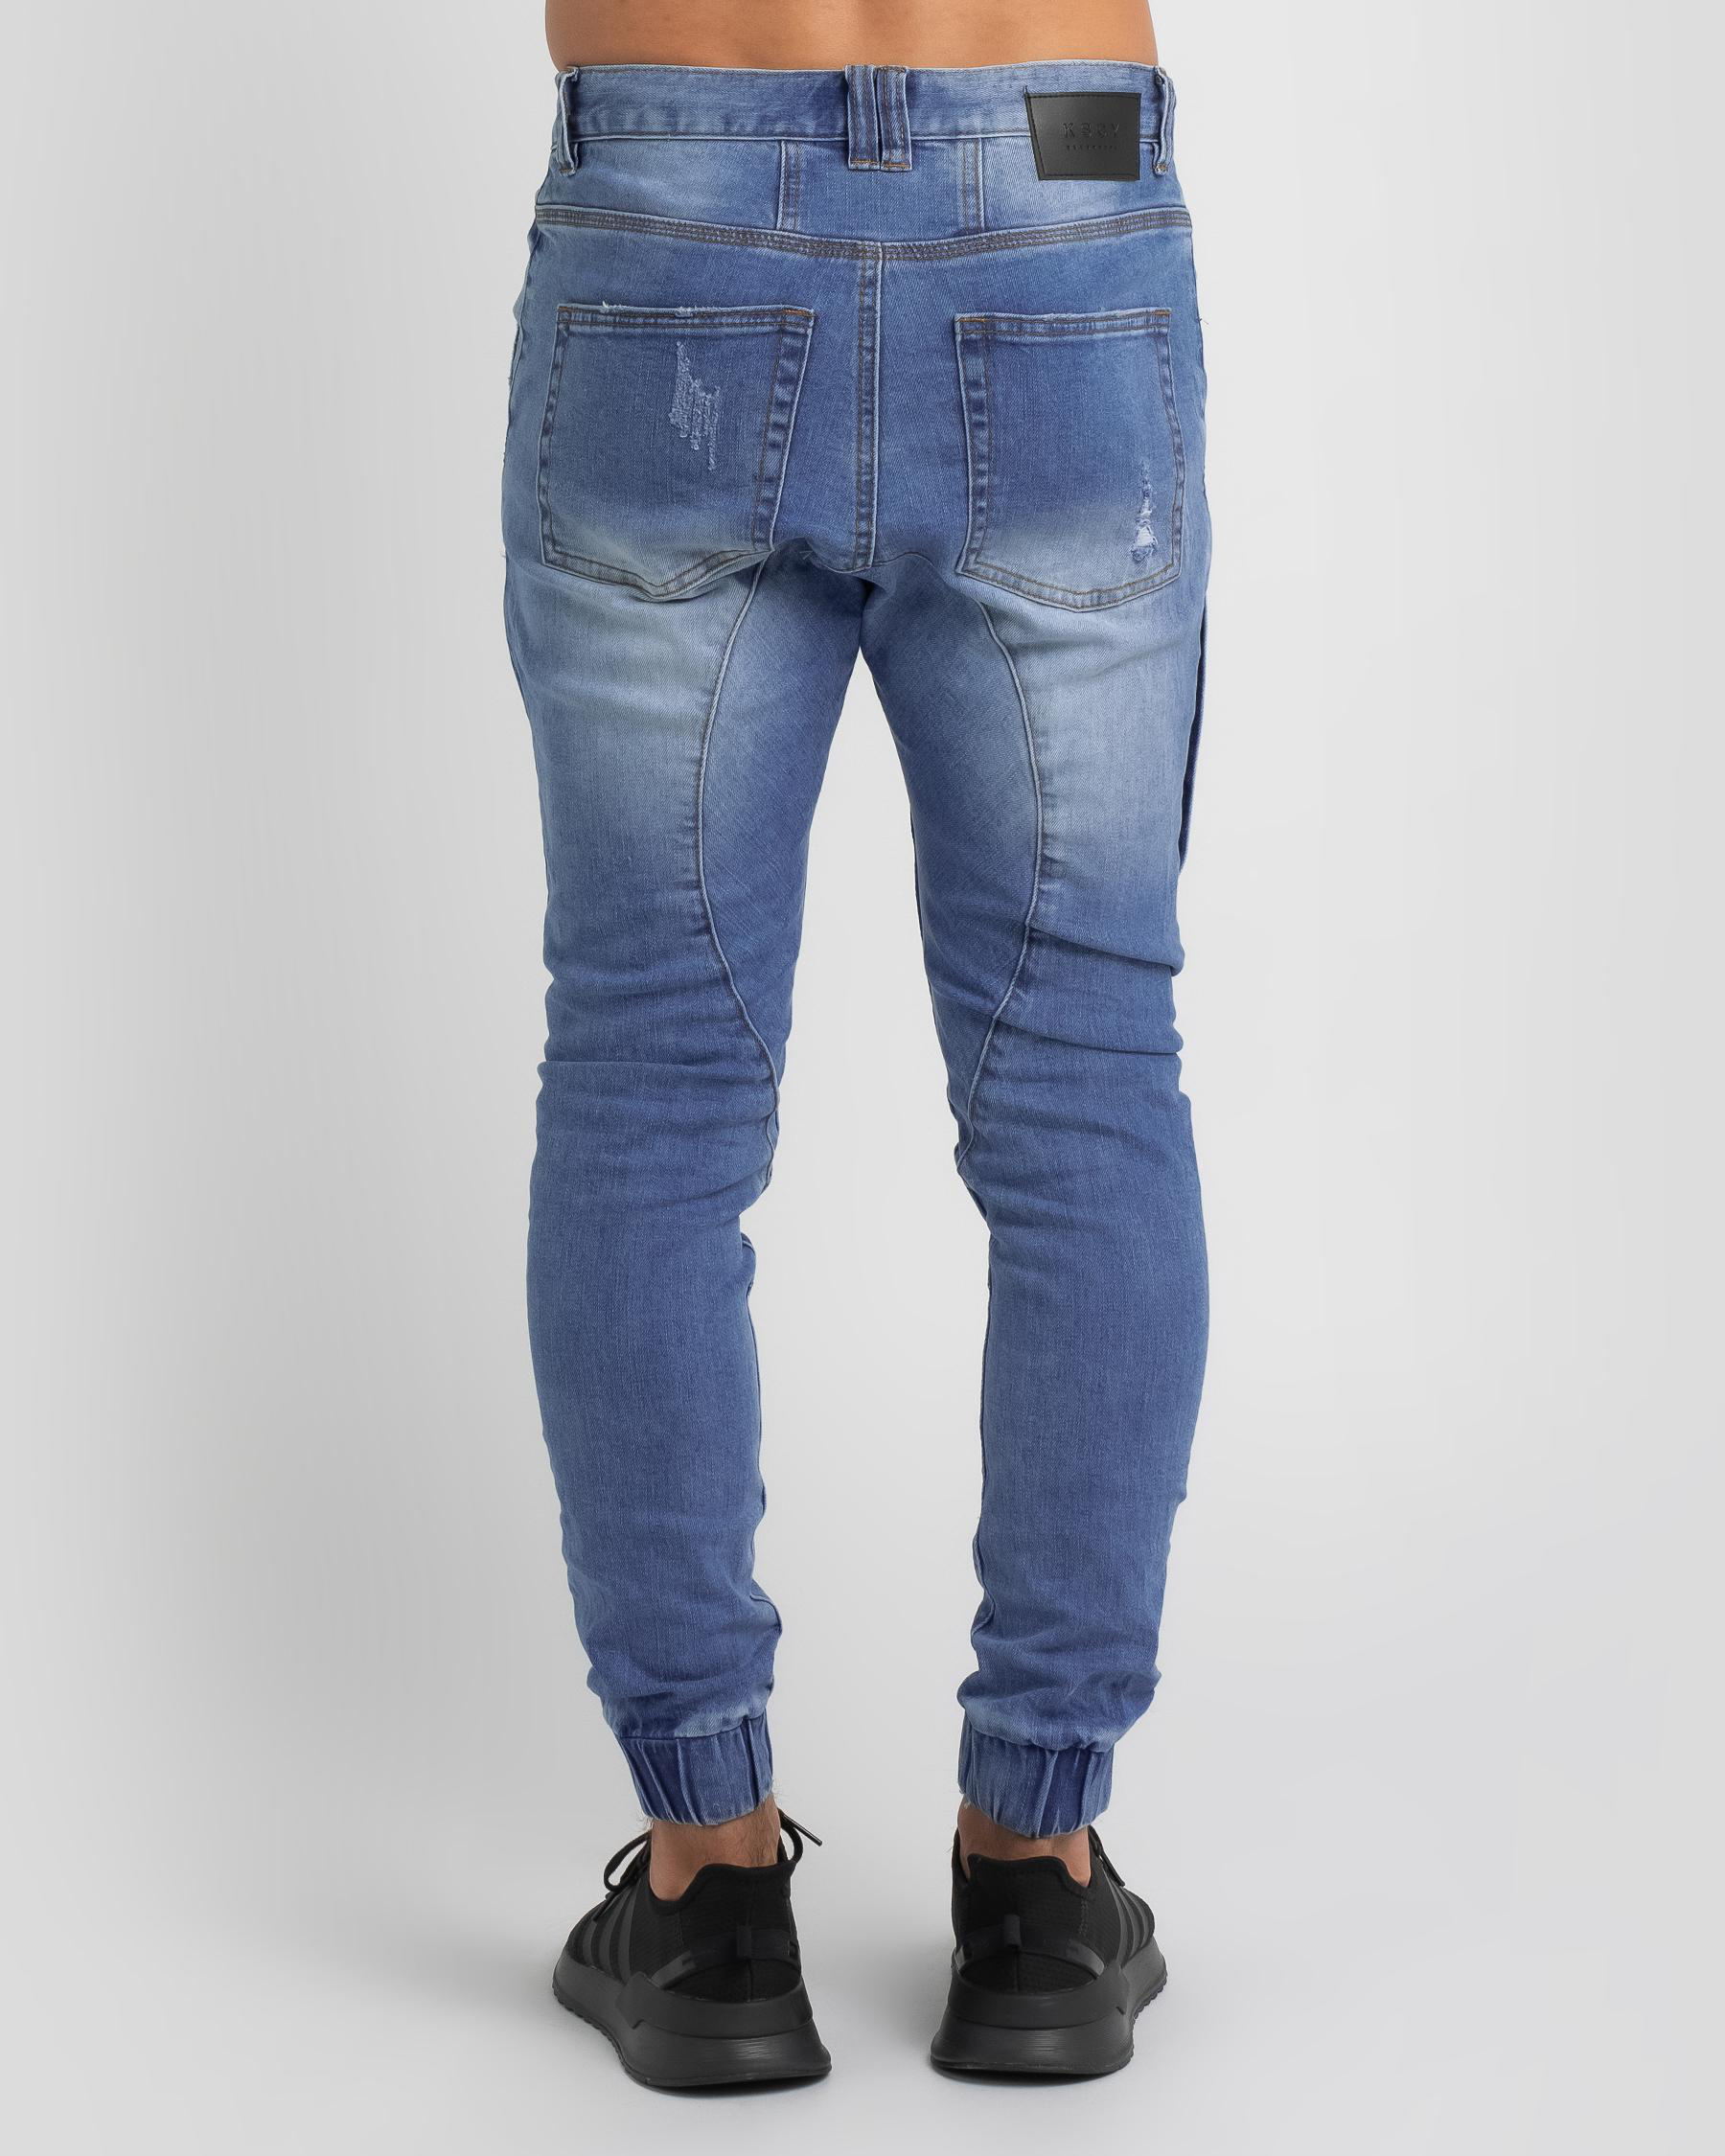 Kiss Chacey Spartan Denim Jogger Pants In Horizon Blue - Fast Shipping ...